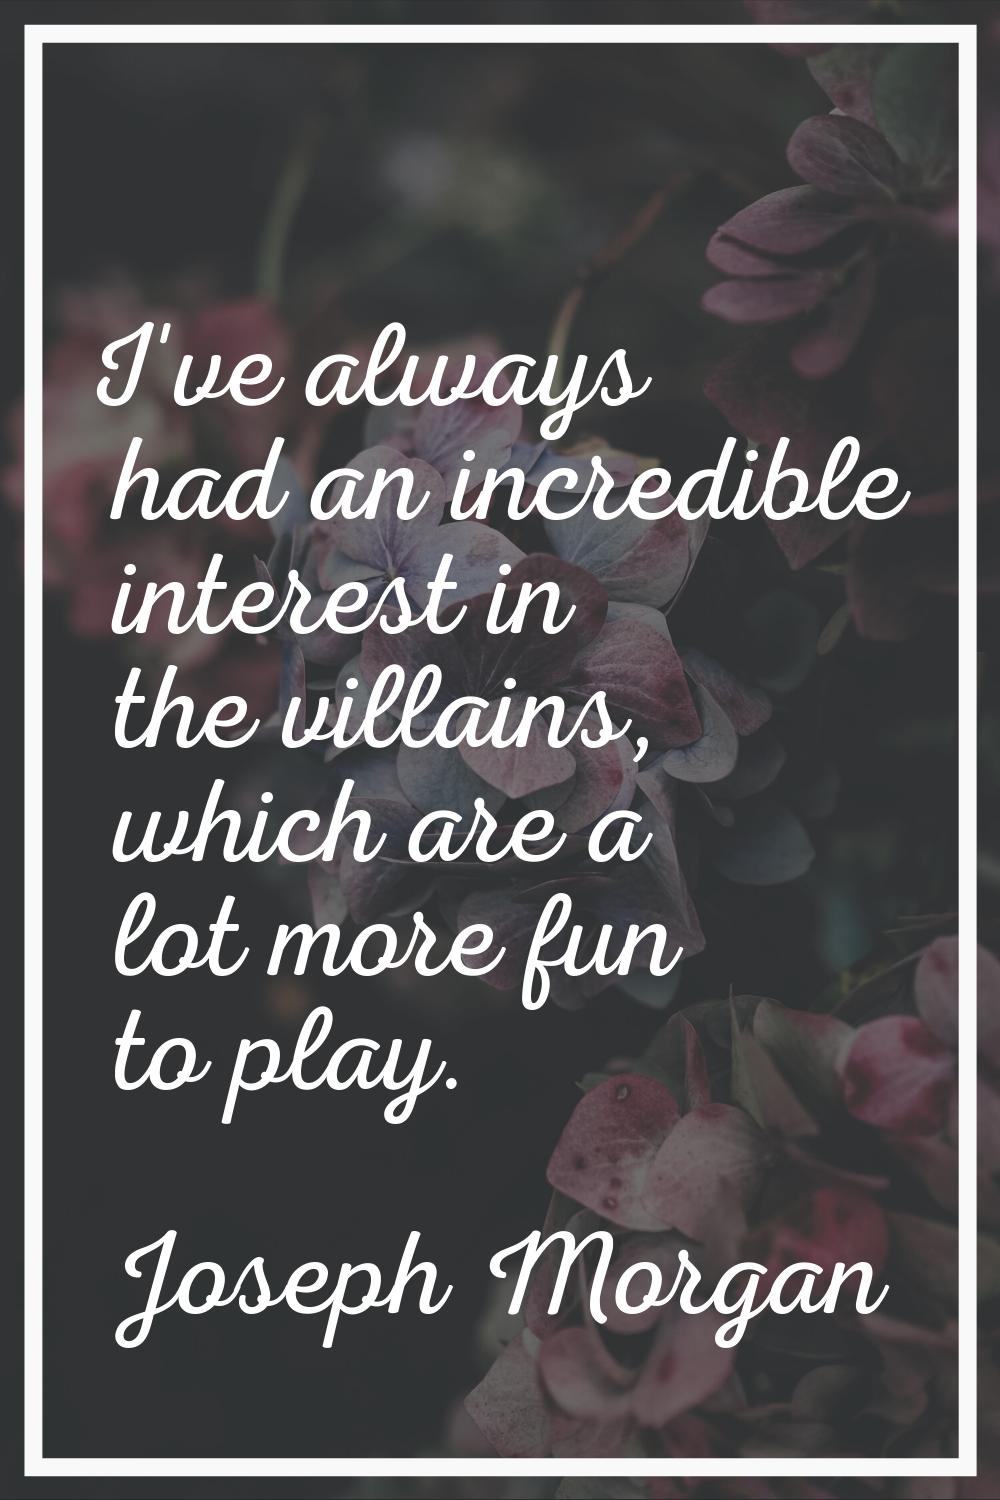 I've always had an incredible interest in the villains, which are a lot more fun to play.